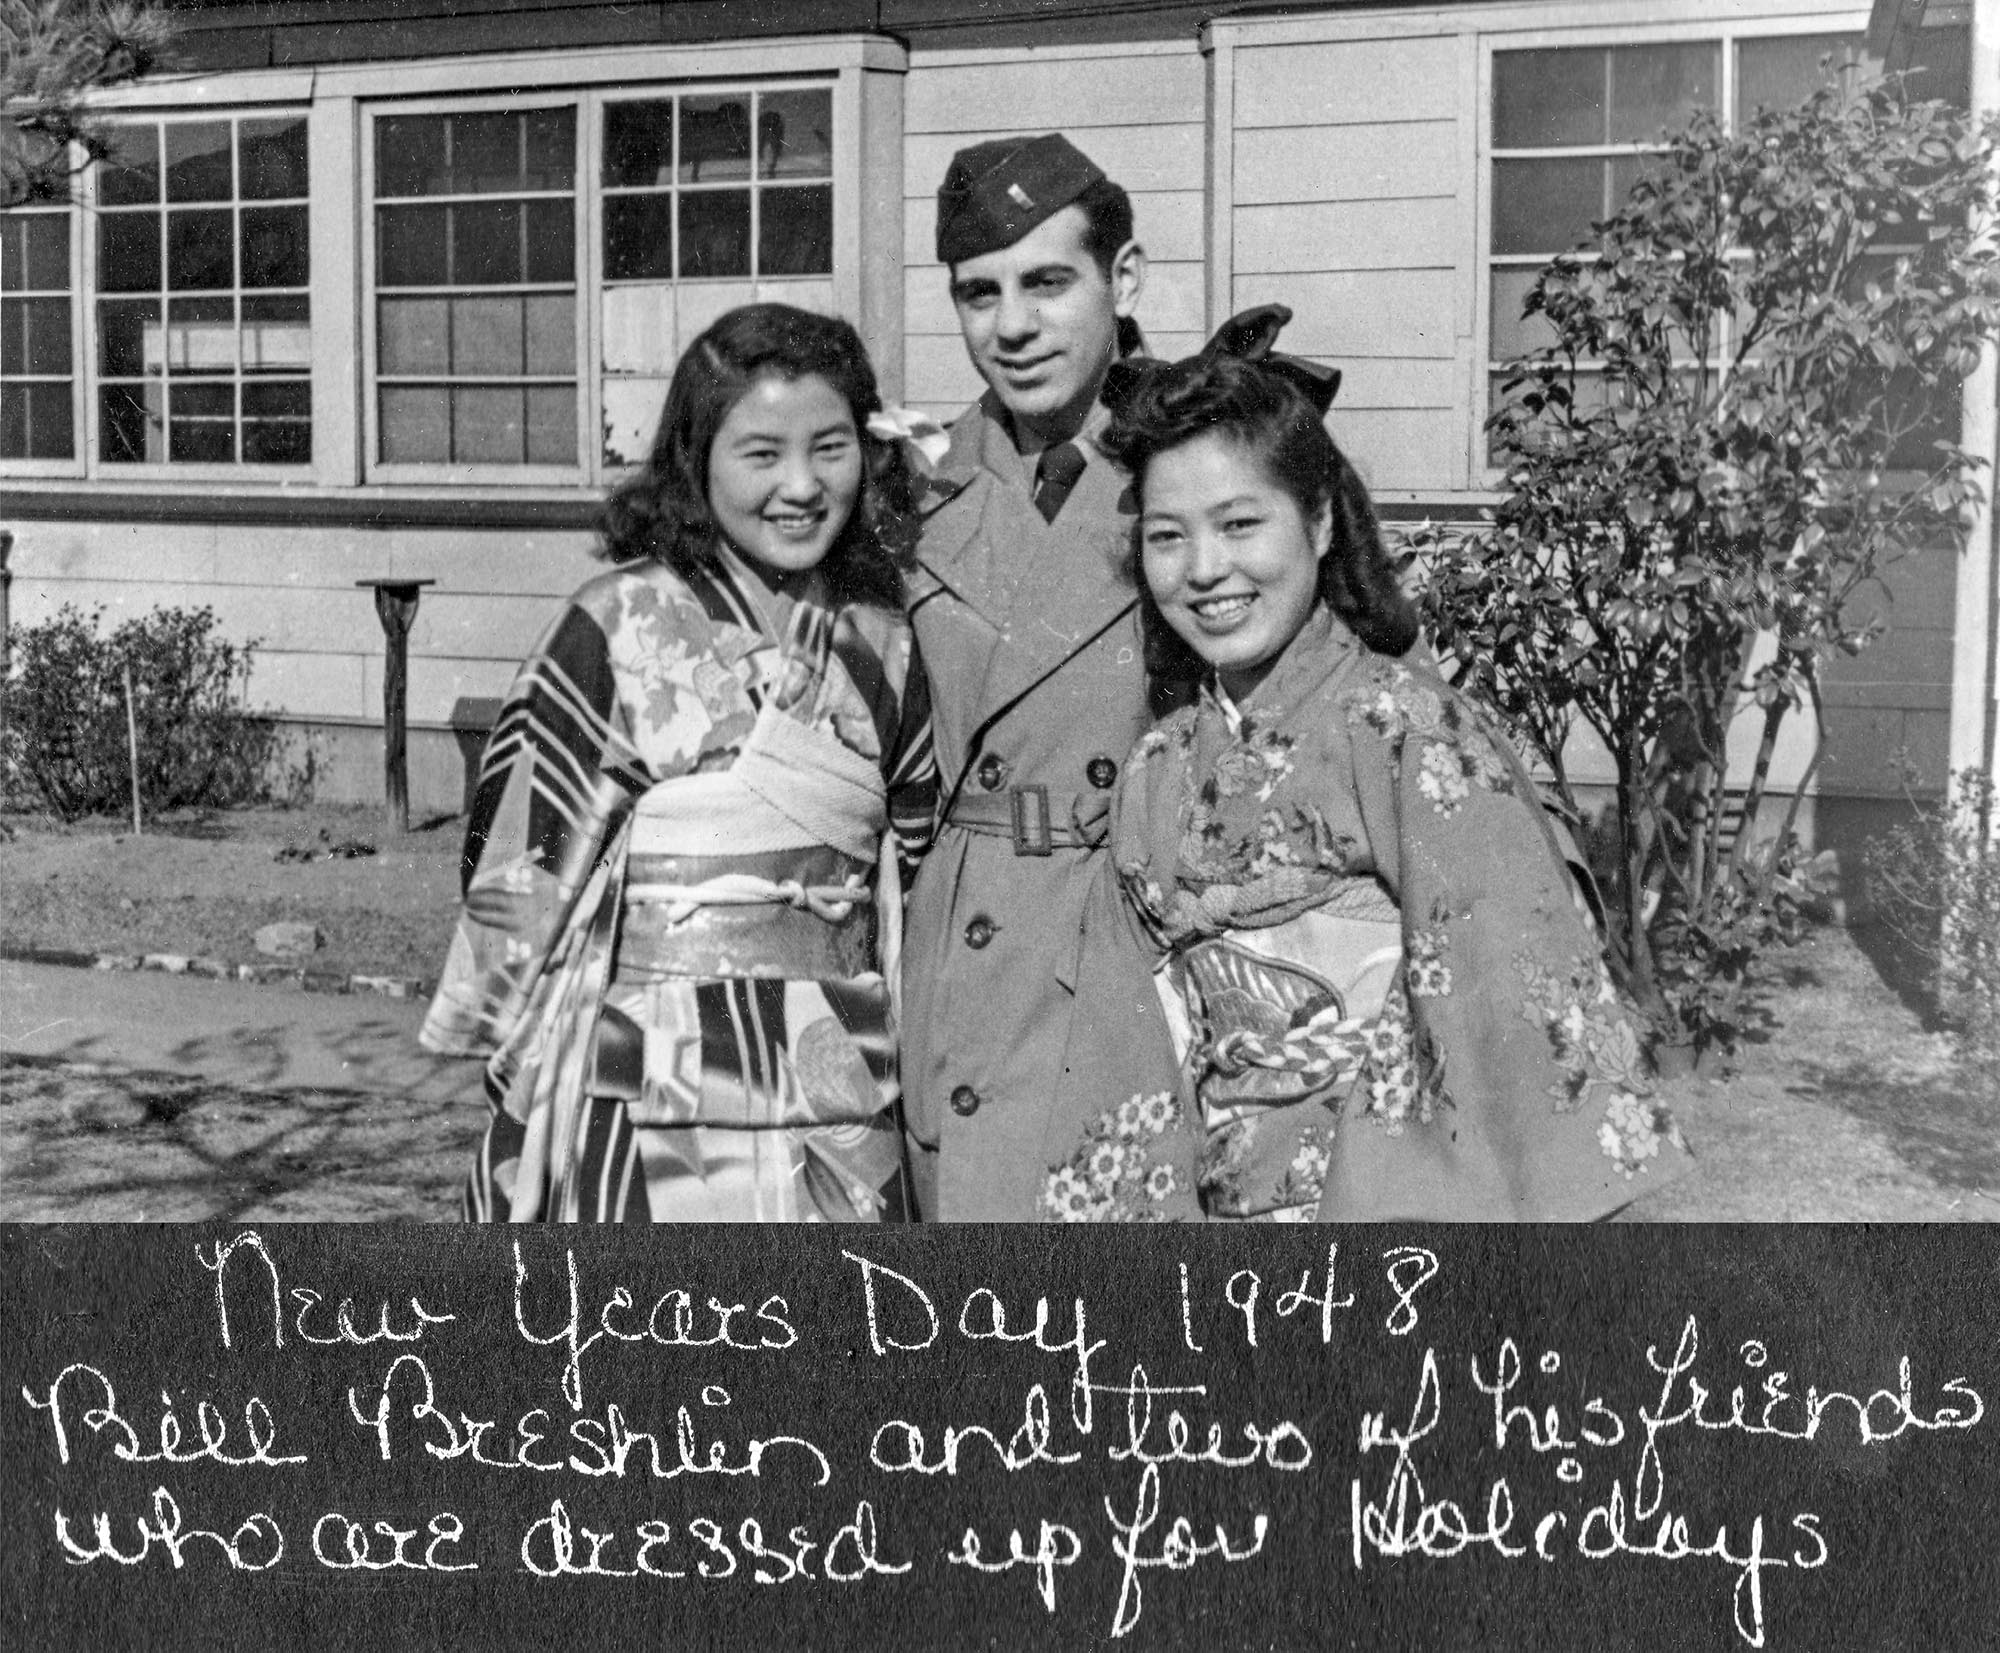 Bill Breshlin, friend of Captain Clarence V. Ward, and his two friends who are dressed up for the holidays.

Ward was sent with the US Army to provide ophthalmology care to war-refugee Japanese children and adults as well as American Service personnel.

From a photo album titled "Pictures from Japan and Elsewhere." Occupied Japan era, Captain Clarence V. Ward, US Army from 1947-1949, 28th General Hospital, Osaka, Japan. Clarence lived in Peoria, Illinois (Feb. 13, 1922 - June 5, 2009).

Ward served in the US Army from 1947-1949, 28th General Hospital, Osaka, Japan attaining the rank of Captain. He graduated from St. Bernard's Grade School in 1936; Spalding Institute in 1940; University of Notre Dame in 1944 where he earned his BS; and University of St. Louis School of Medicine in 1946. He served his internship at St. John's Hospital in St. Louis, MO from 1946-1947; Post Graduate at Northwestern University in Ophthalmology from 1949-1950; Residency at Hines Veterans Hospital in Hines, IL from 1950-1952 in Ophthalmology. He was an Ophthalmologist full time from 1952-1995 and part time from 1996-2004.